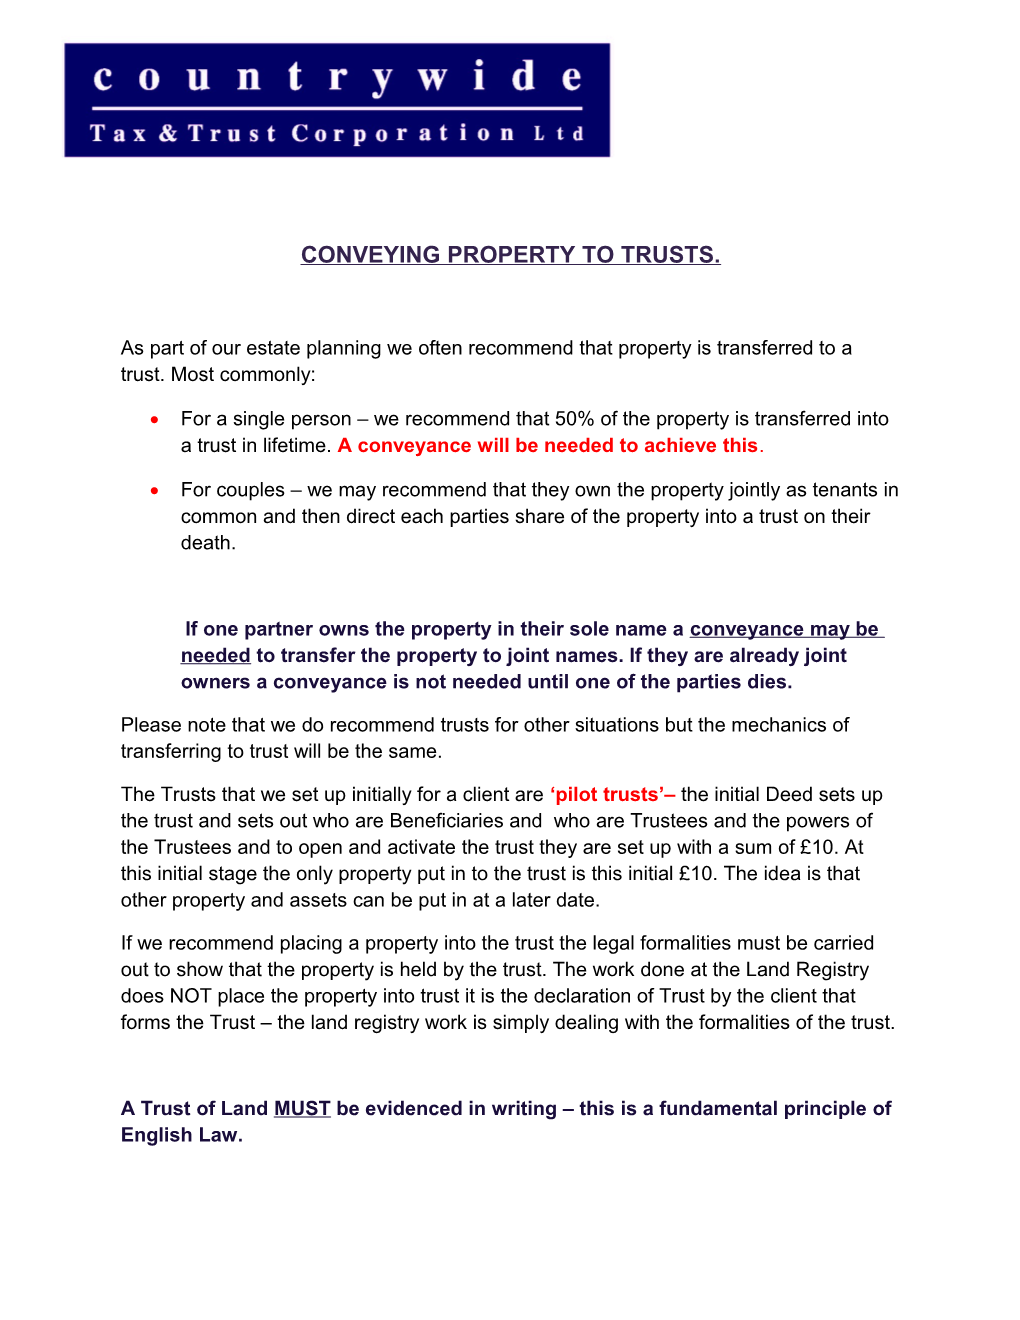 Conveying Property to Trusts